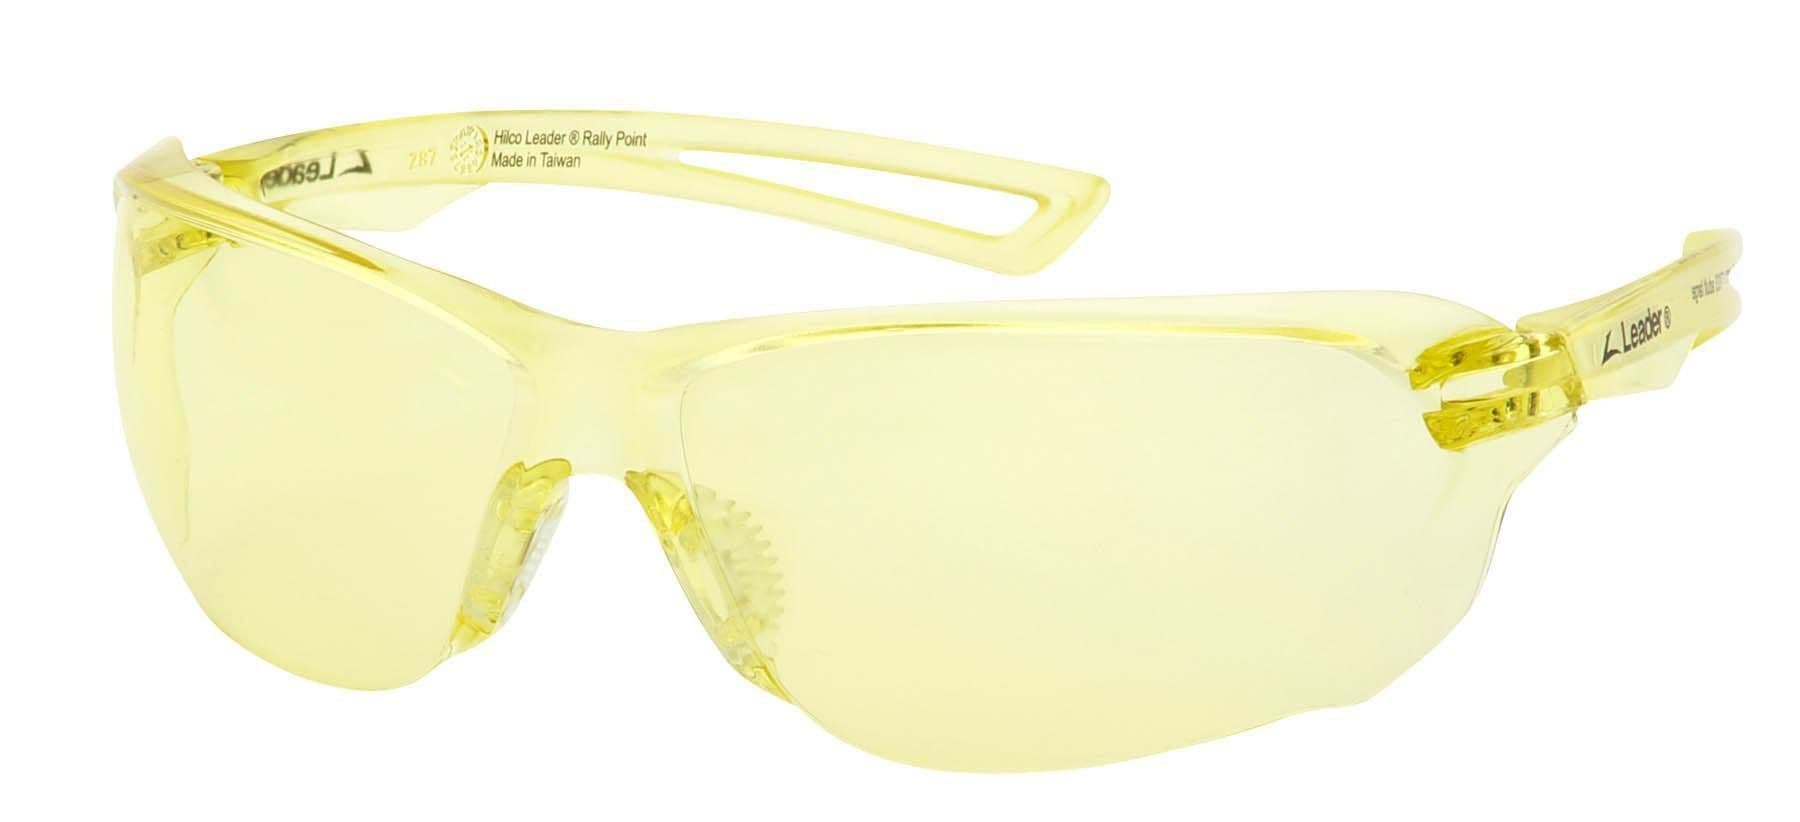 Hilco Leader Rally Point Sports Glasses